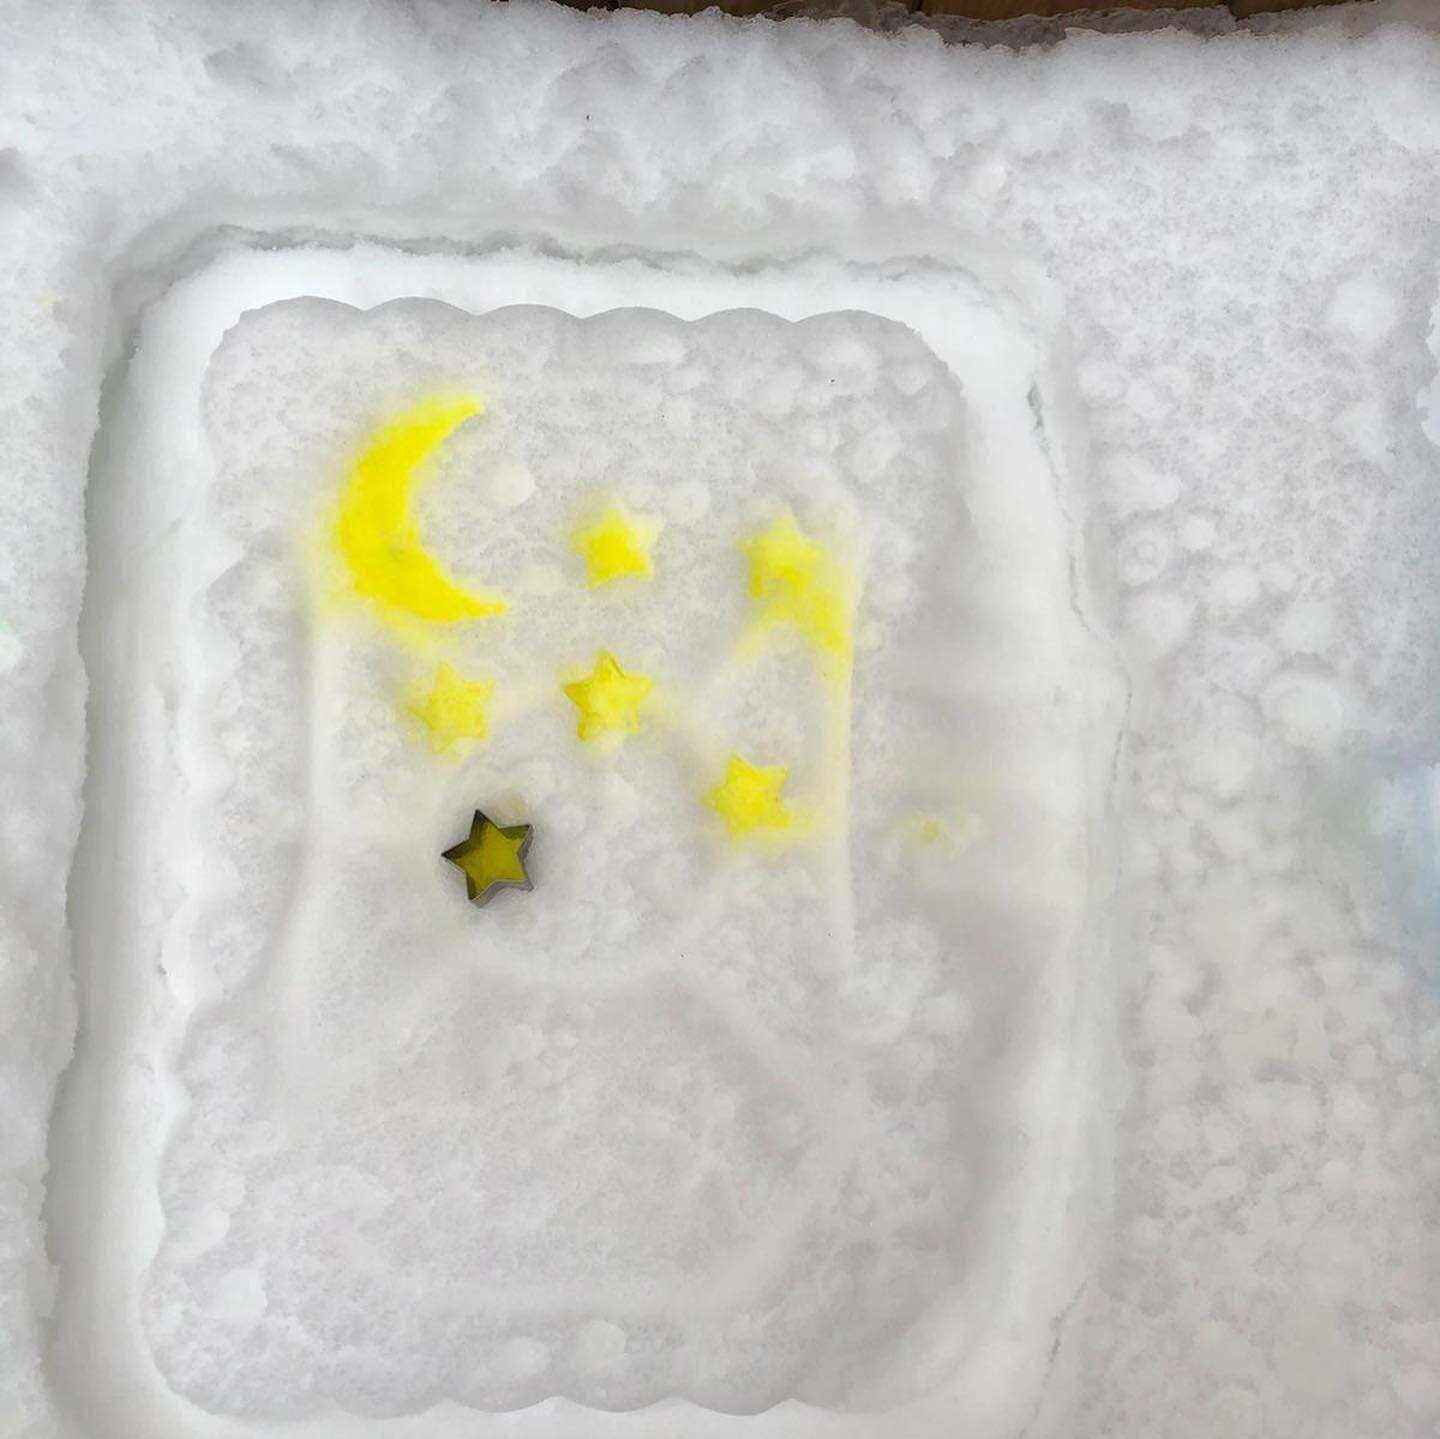 More snow paintings ! : ) ❄️ ❄️❄️ ❄️ -stir water and corn starch
-add food colouring
-pour into a spray bottle/ paint brush/ cookie cutter #artsmartclinton